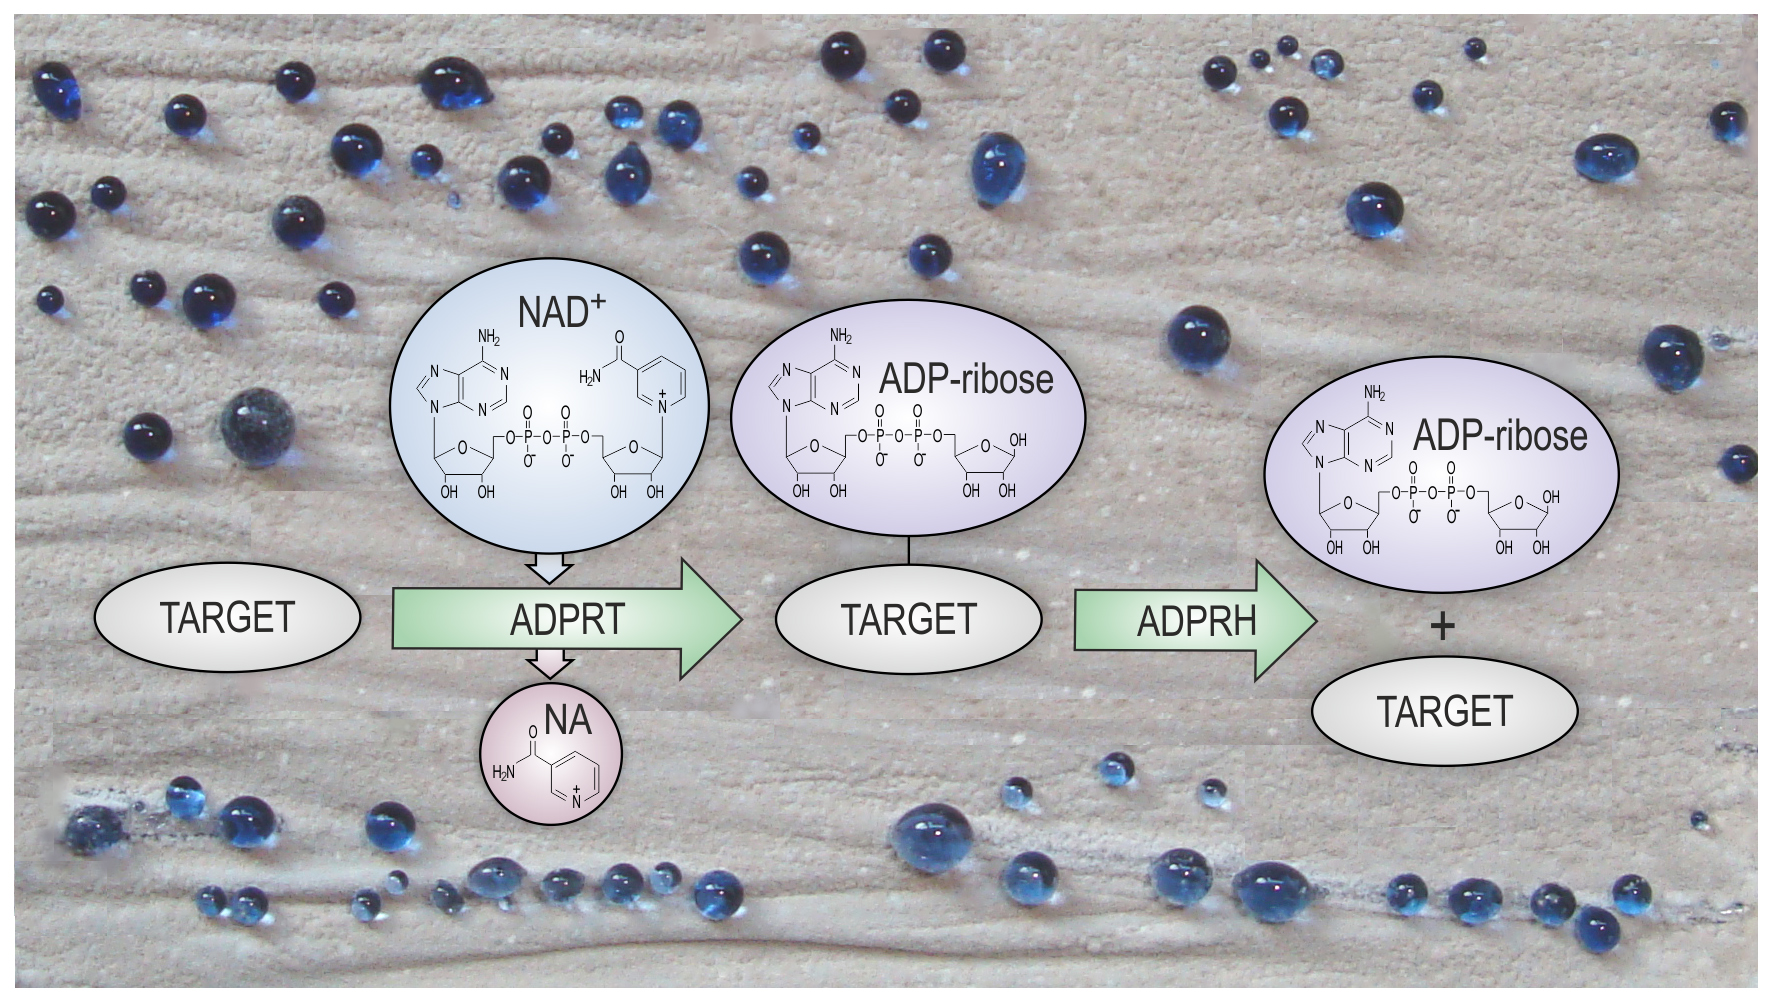 Understanding the role of protein ADP-ribosylation modification in bacteria